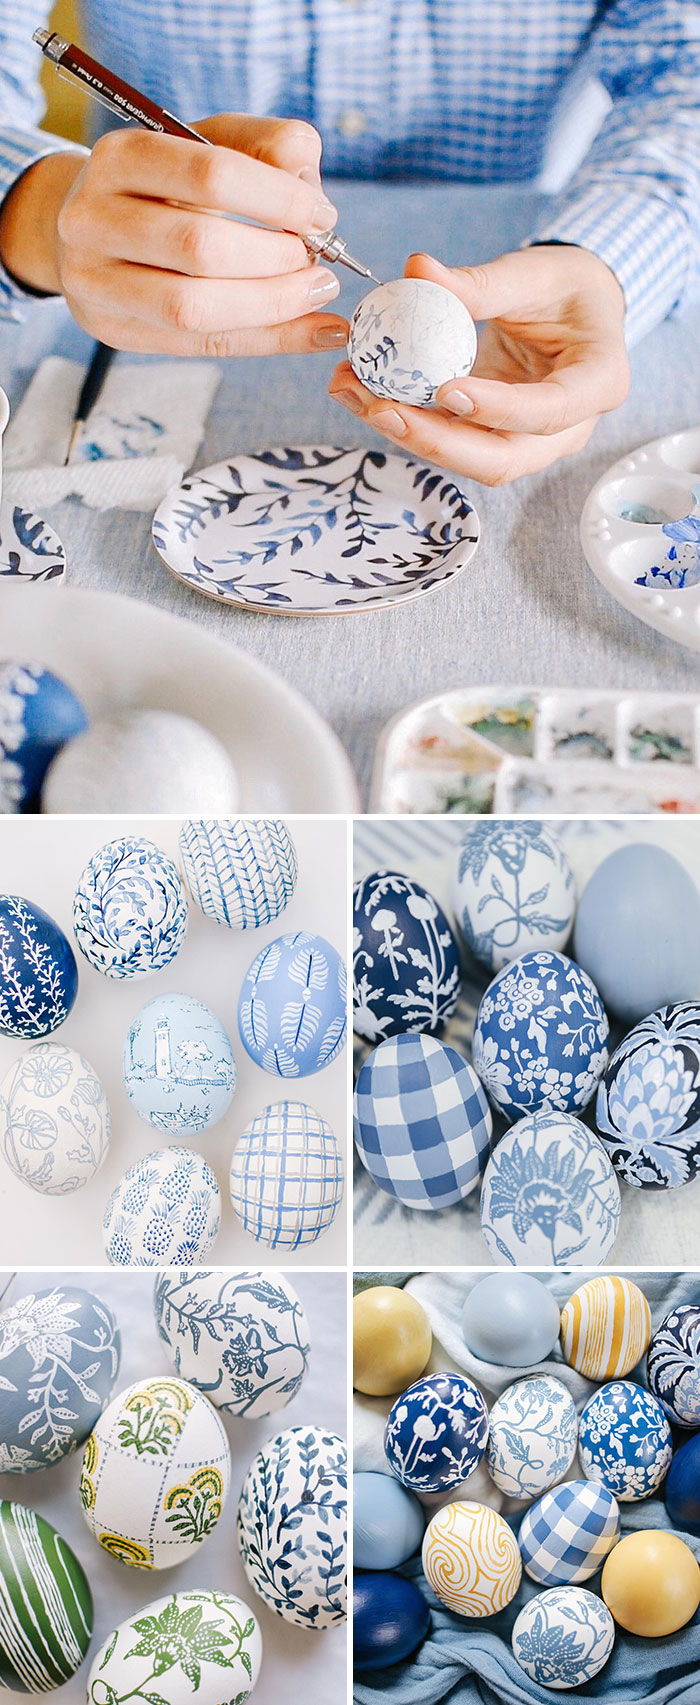 We Hope To Inspire A New And Creative Way To Add A Splash Of Paint To Your Easter Eggs 